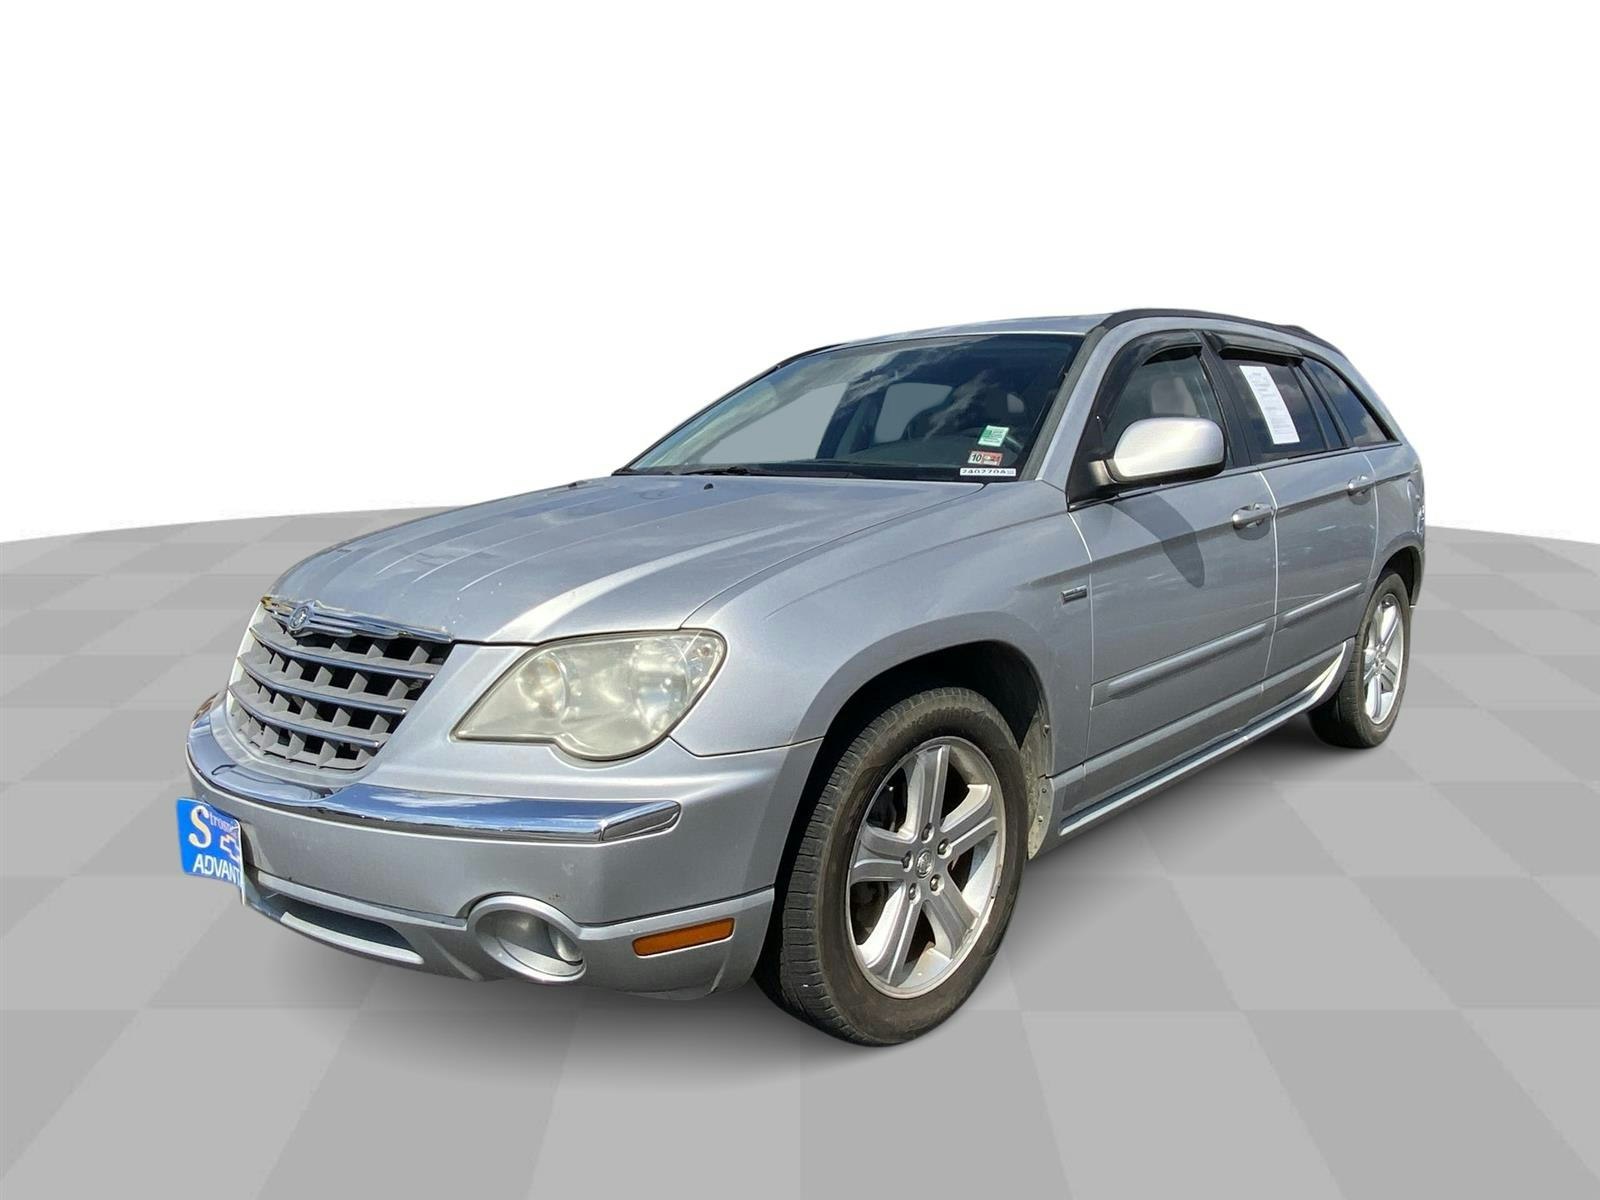 2008 Chrysler PACIFICA (240270A) Main Image